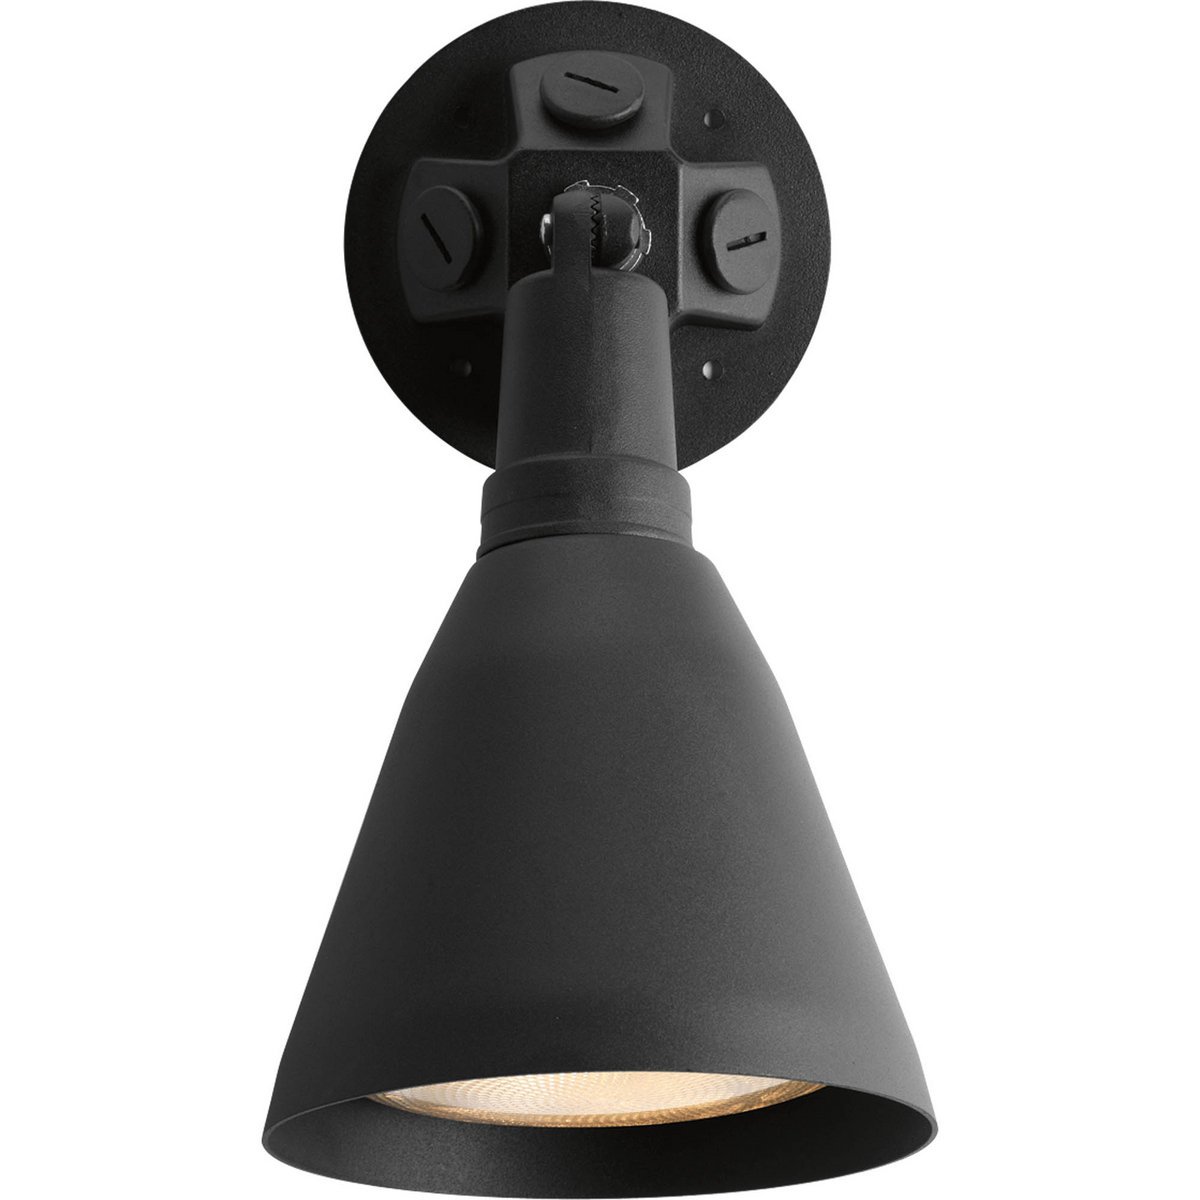 Outdoor adjustable swivel floodlight in a painted Black finish and solid Aluminum construction.